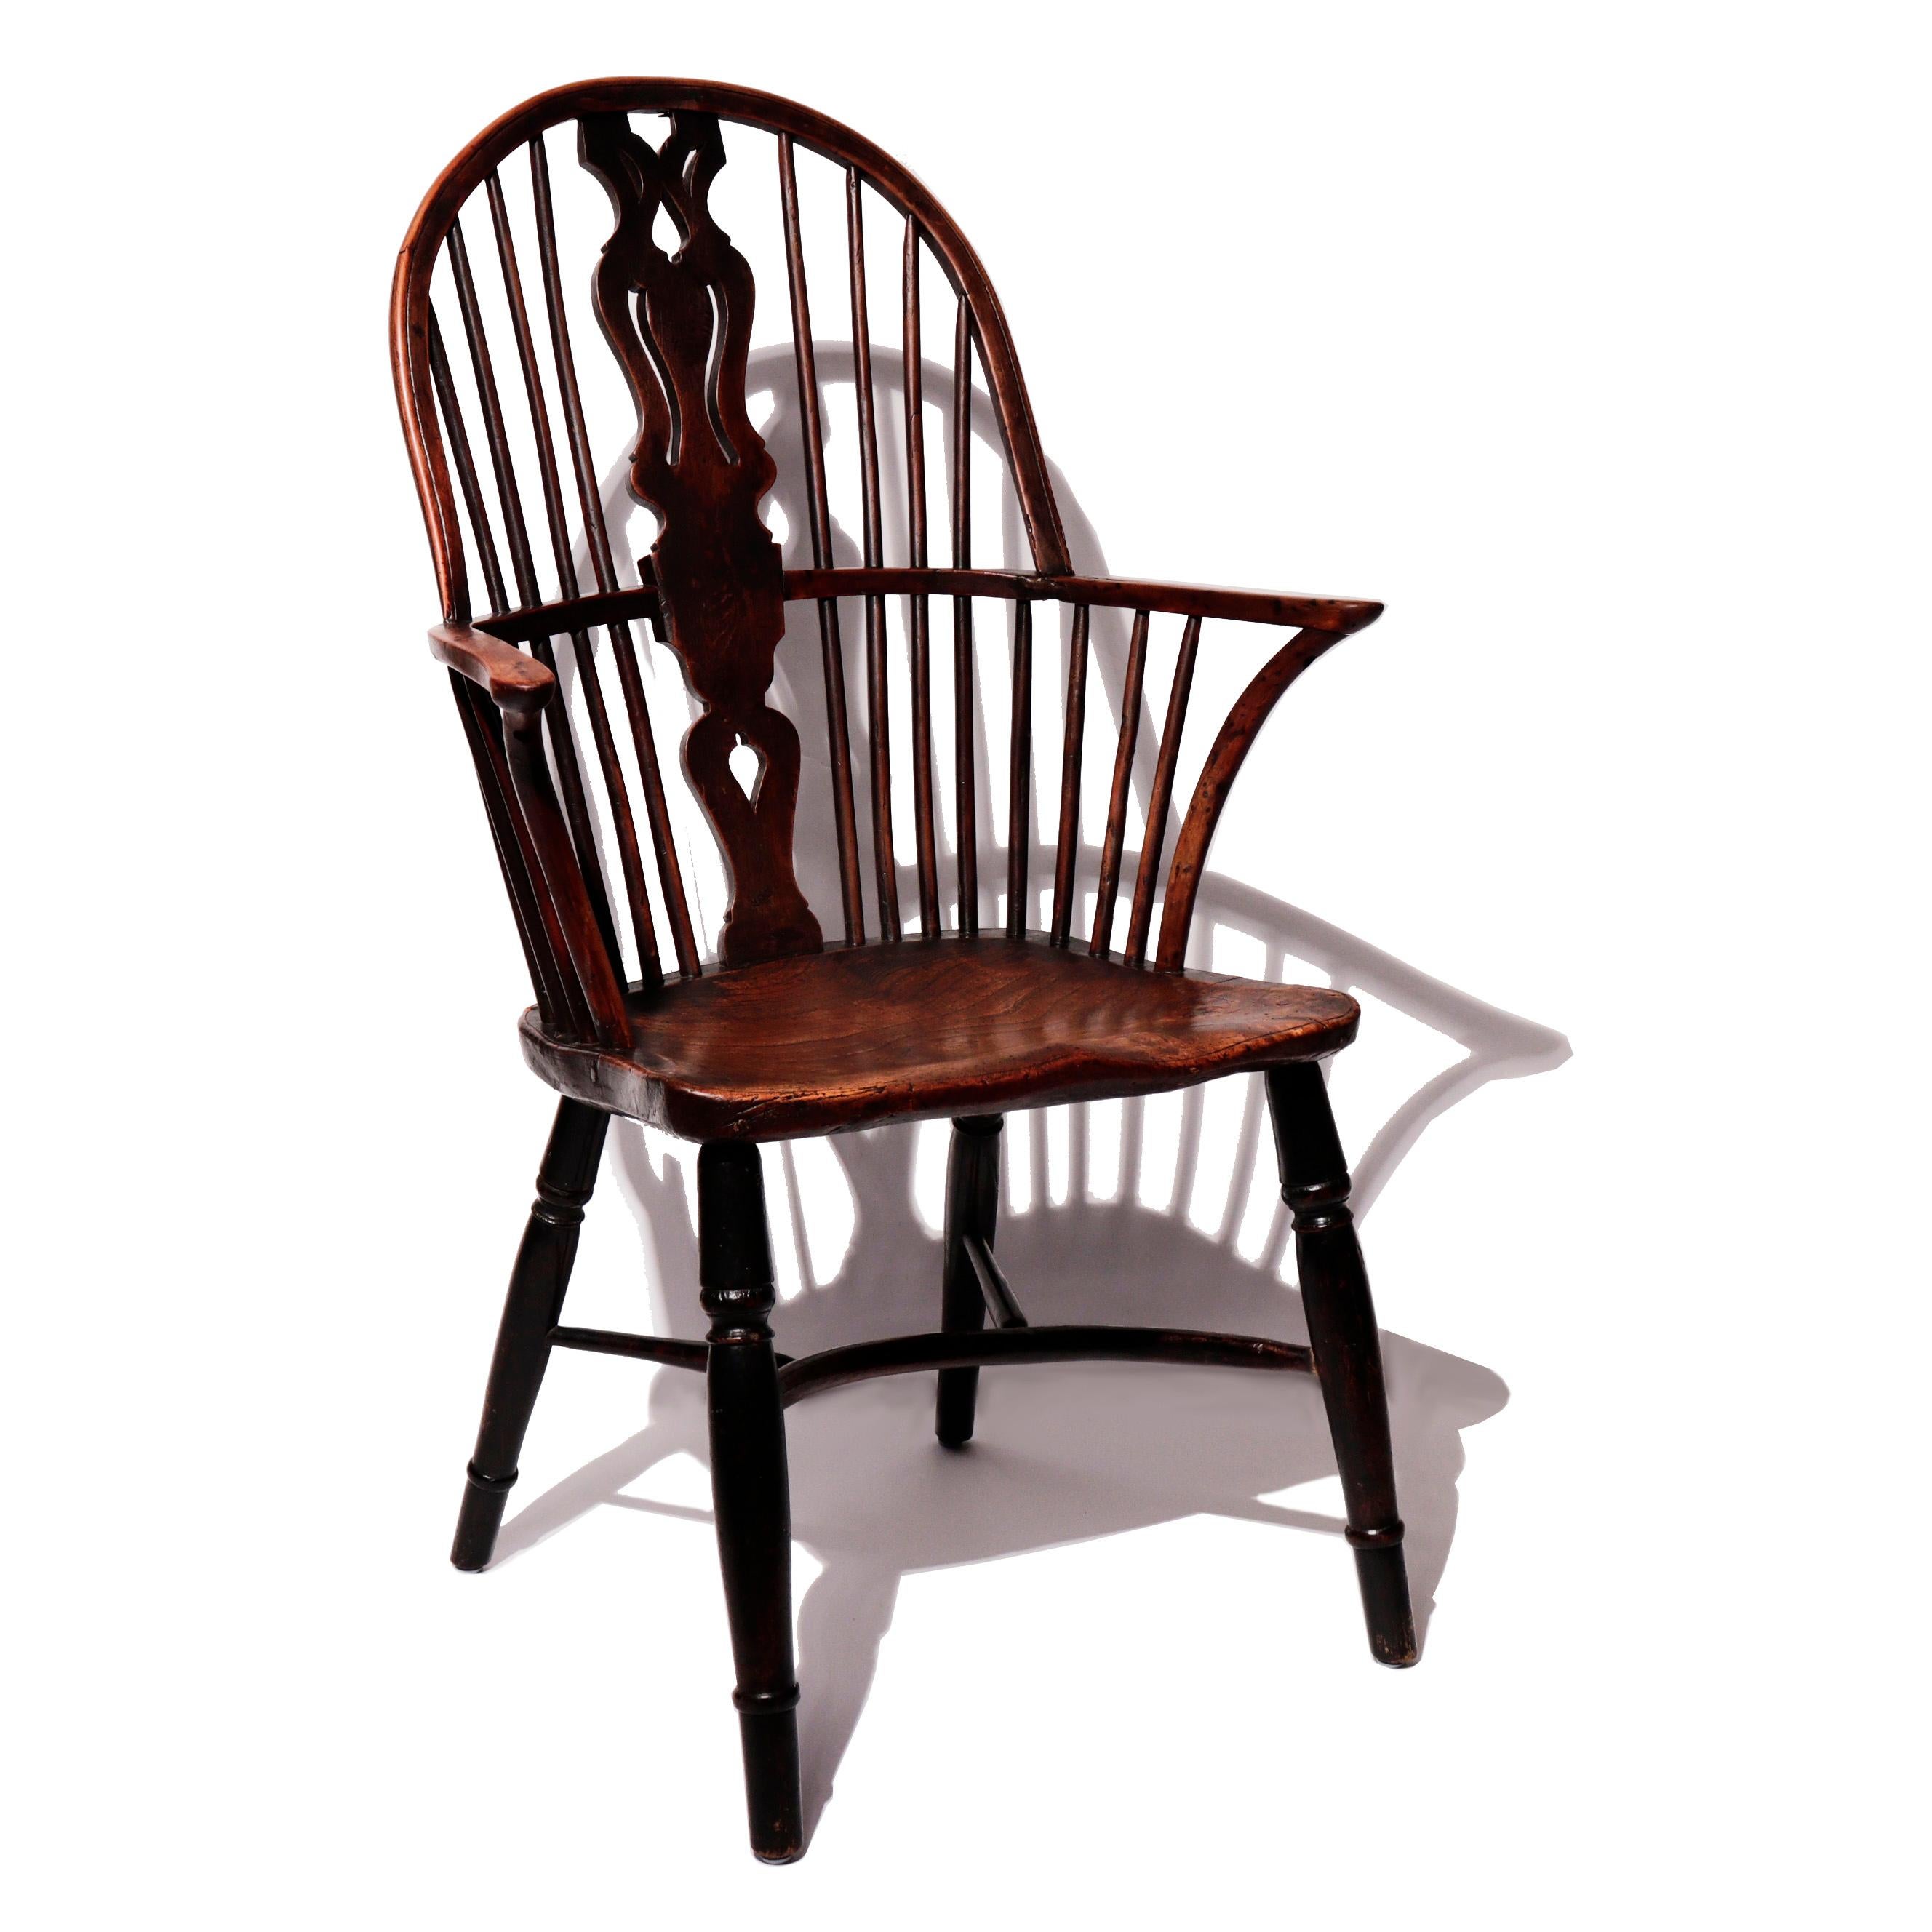 Antique English Georgian High Windsor Armchair, the contoured saddle seat with a rich grained elm, the rest crafted from yew, turned baluster legs joined by a crinoline stretcher, a large and well detailed pierced-shaped back splat, splayed out arms